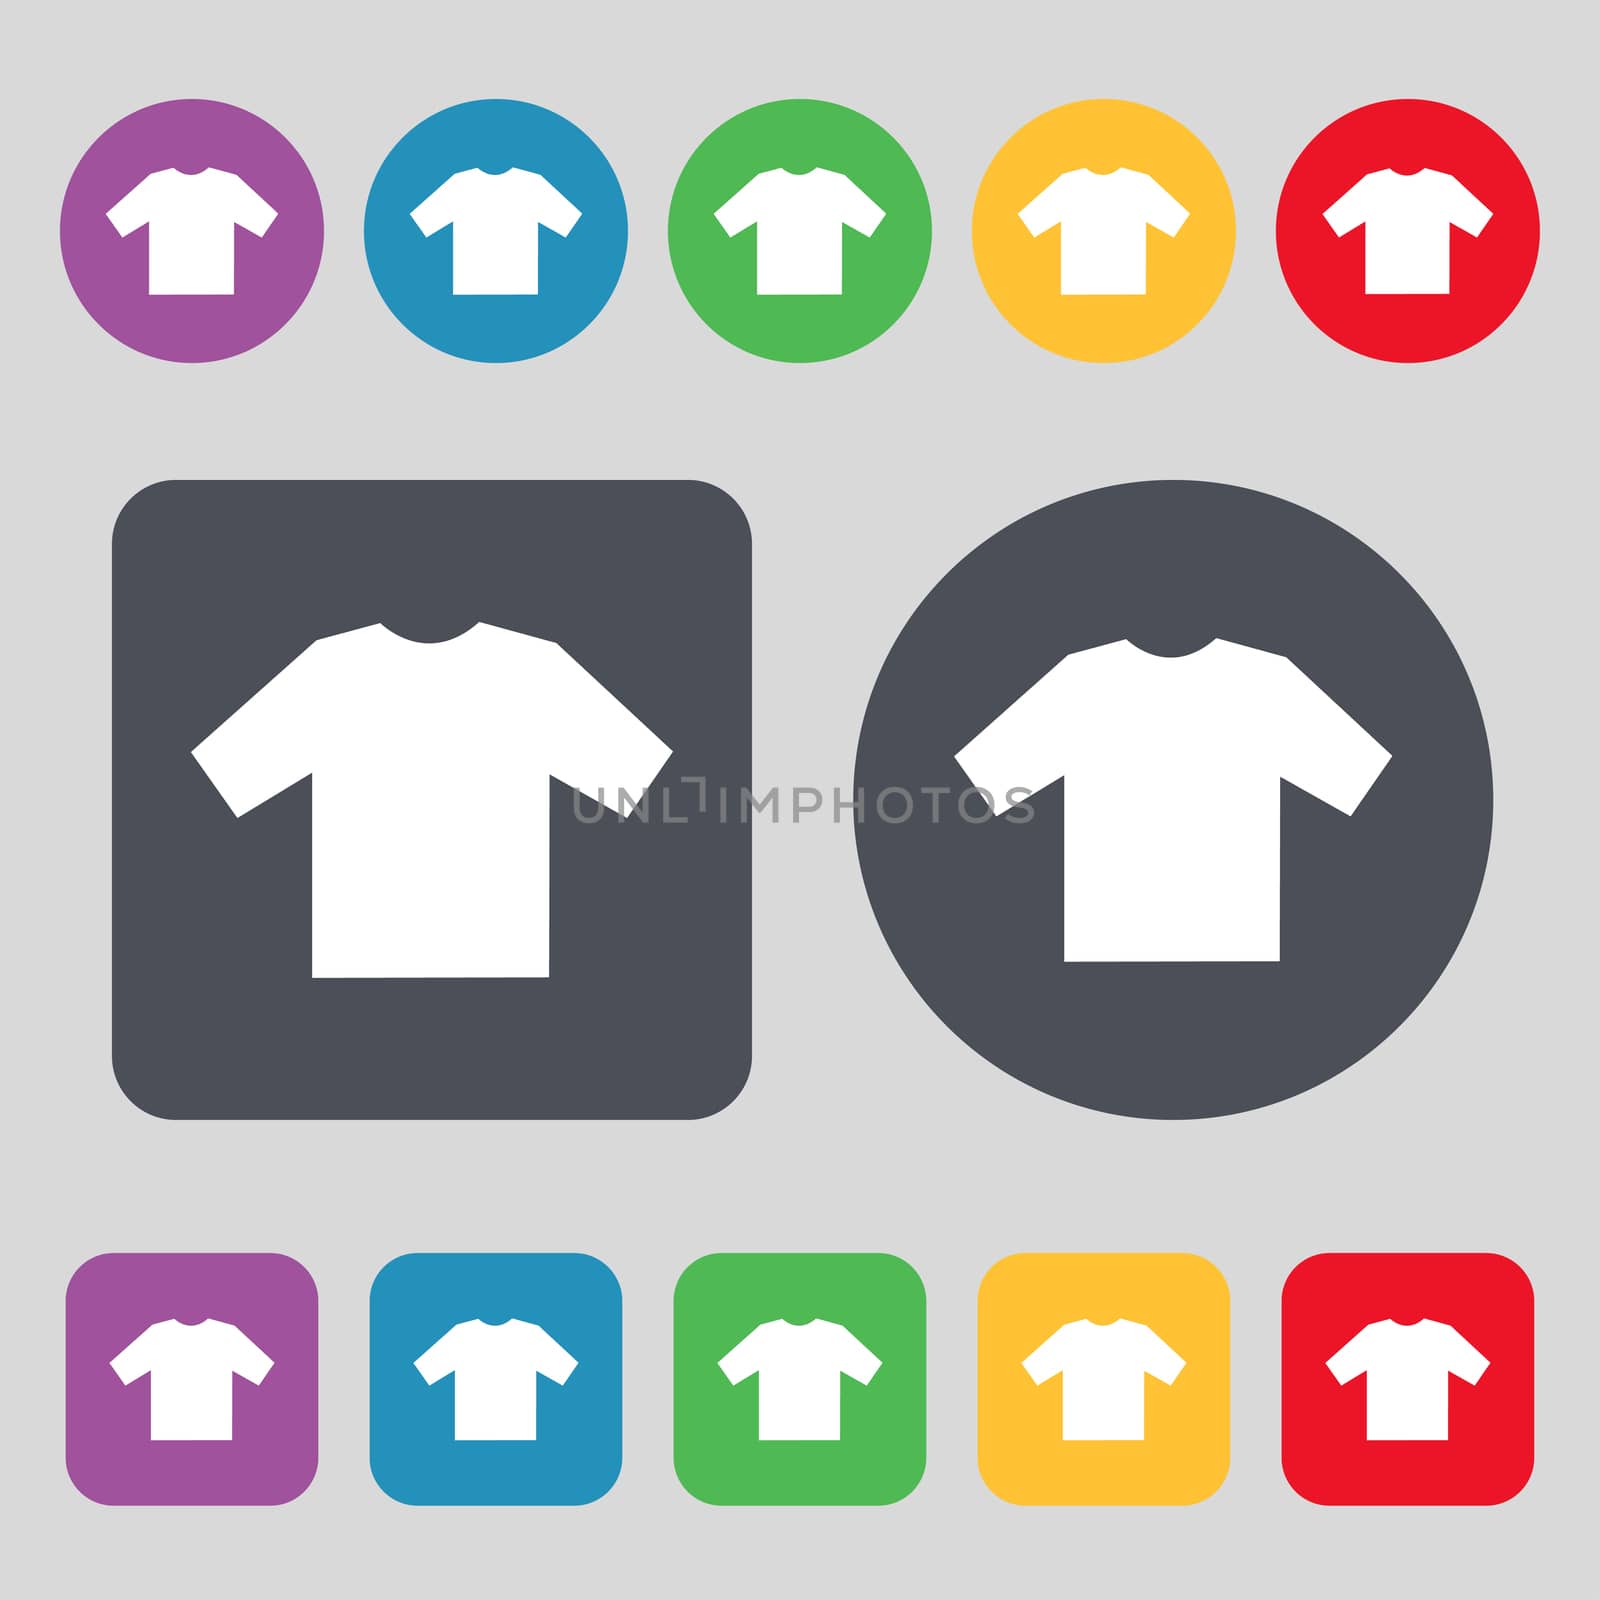 t-shirt icon sign. A set of 12 colored buttons. Flat design. illustration